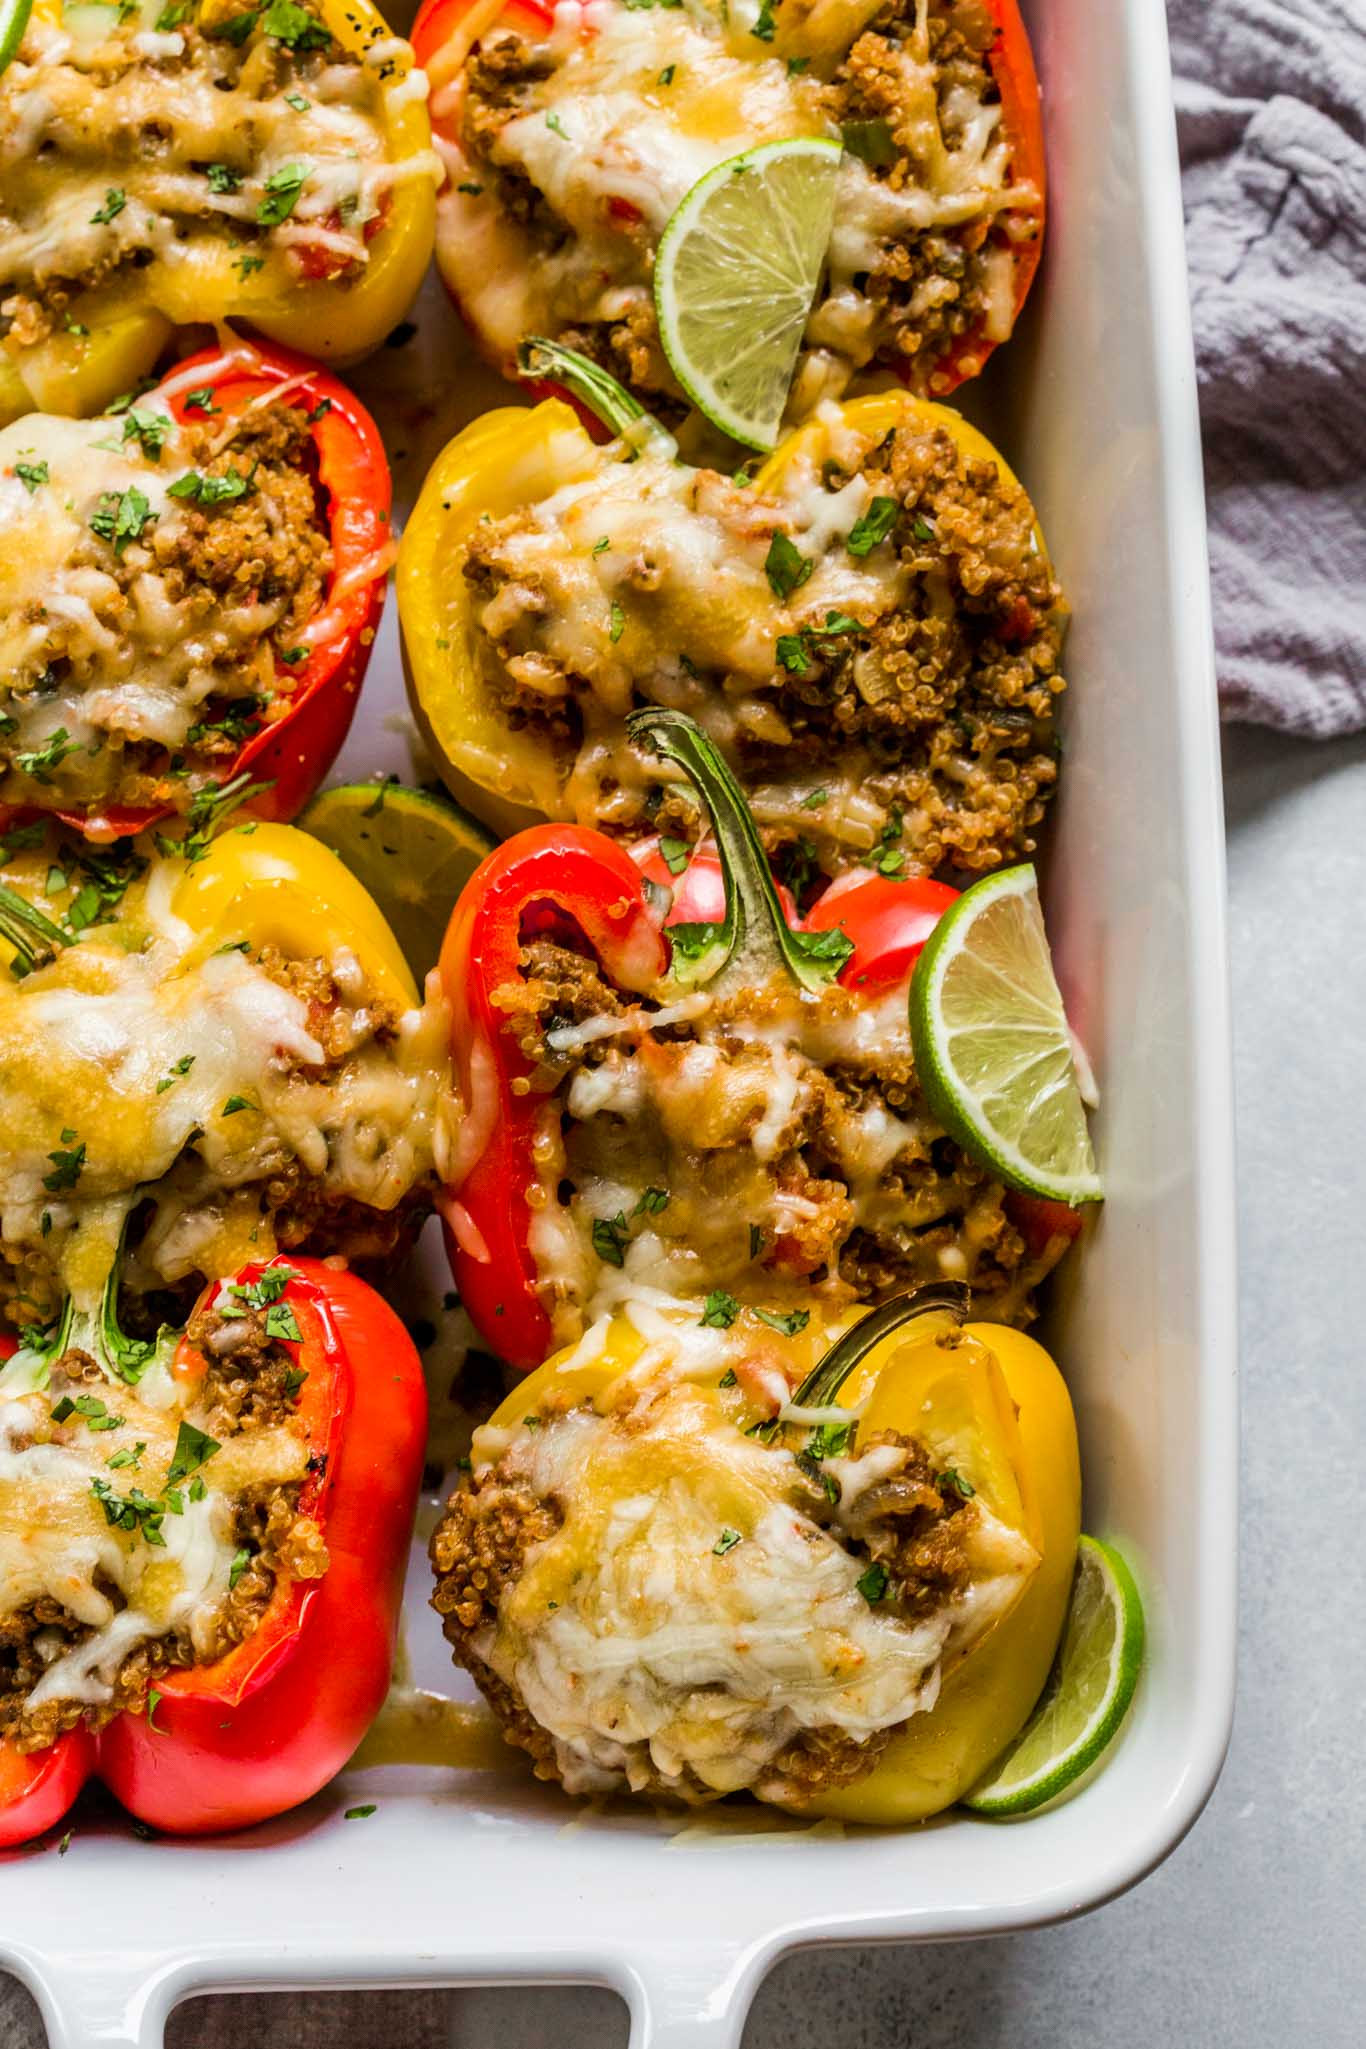 Quinoa And Beef Stuffed Peppers
 Southwest Beef & Quinoa Stuffed Peppers